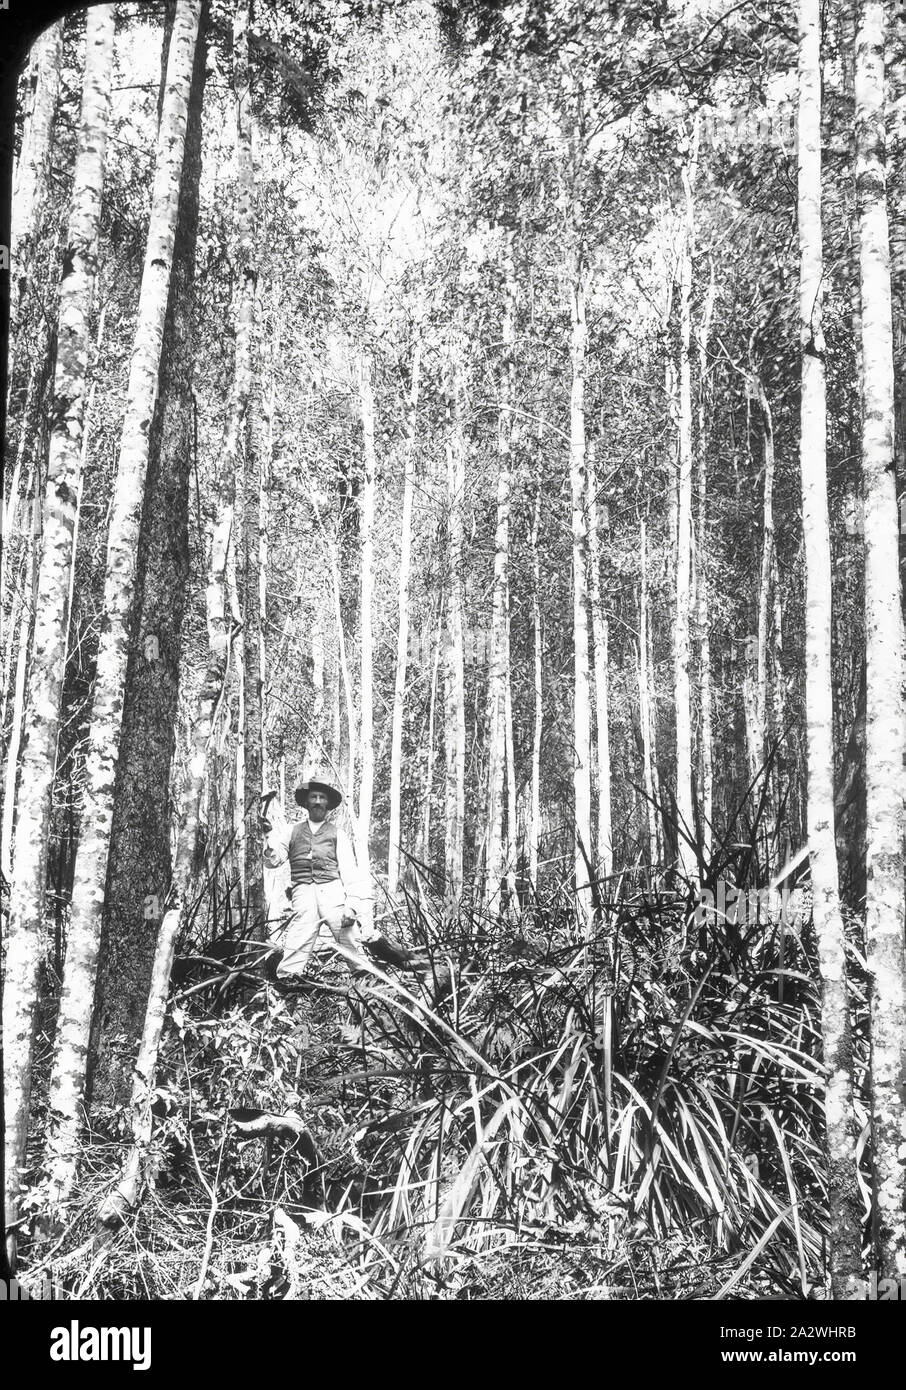 Lantern Slide - Forest, Sassafras, Victoria, Date Unknown, Black and white image of the forest at Sassafras, photographer not known Stock Photo